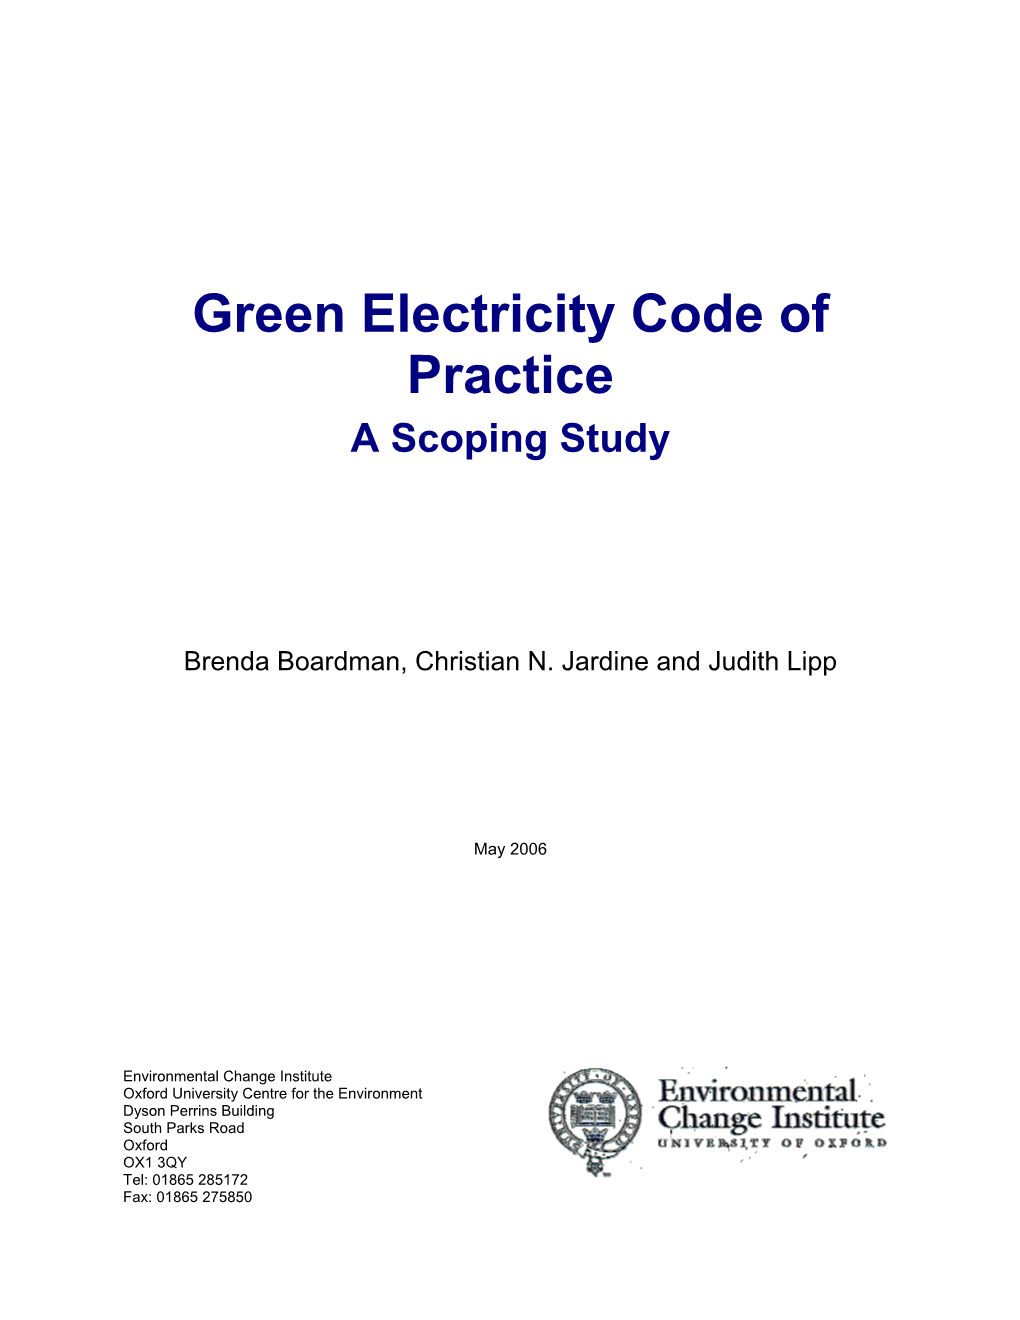 Green Electricity Code of Practice a Scoping Study